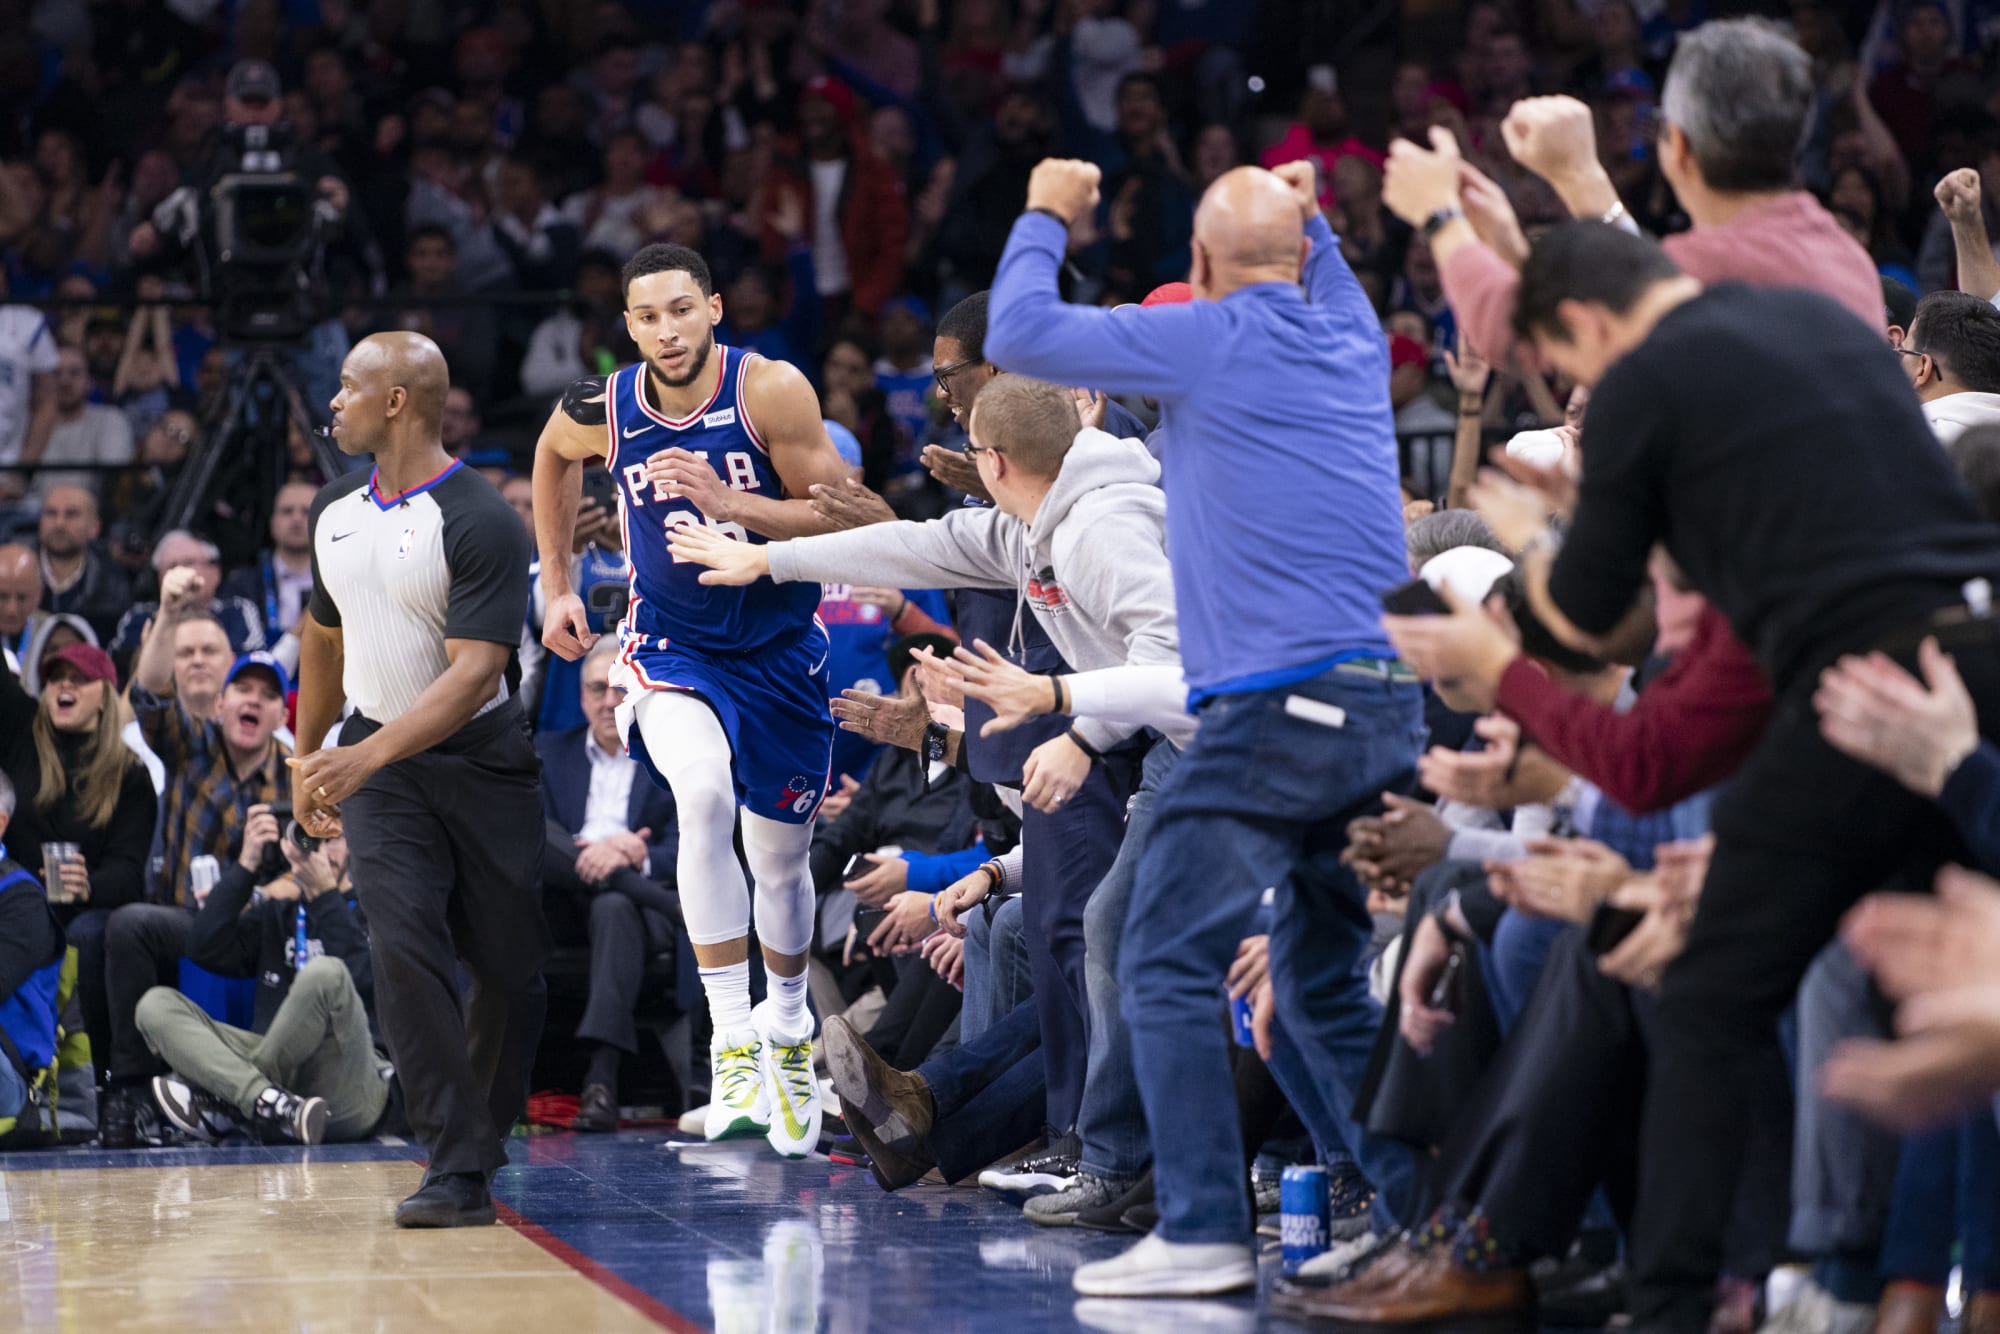 Ben Simmons has praise and criticism for Sixers fans